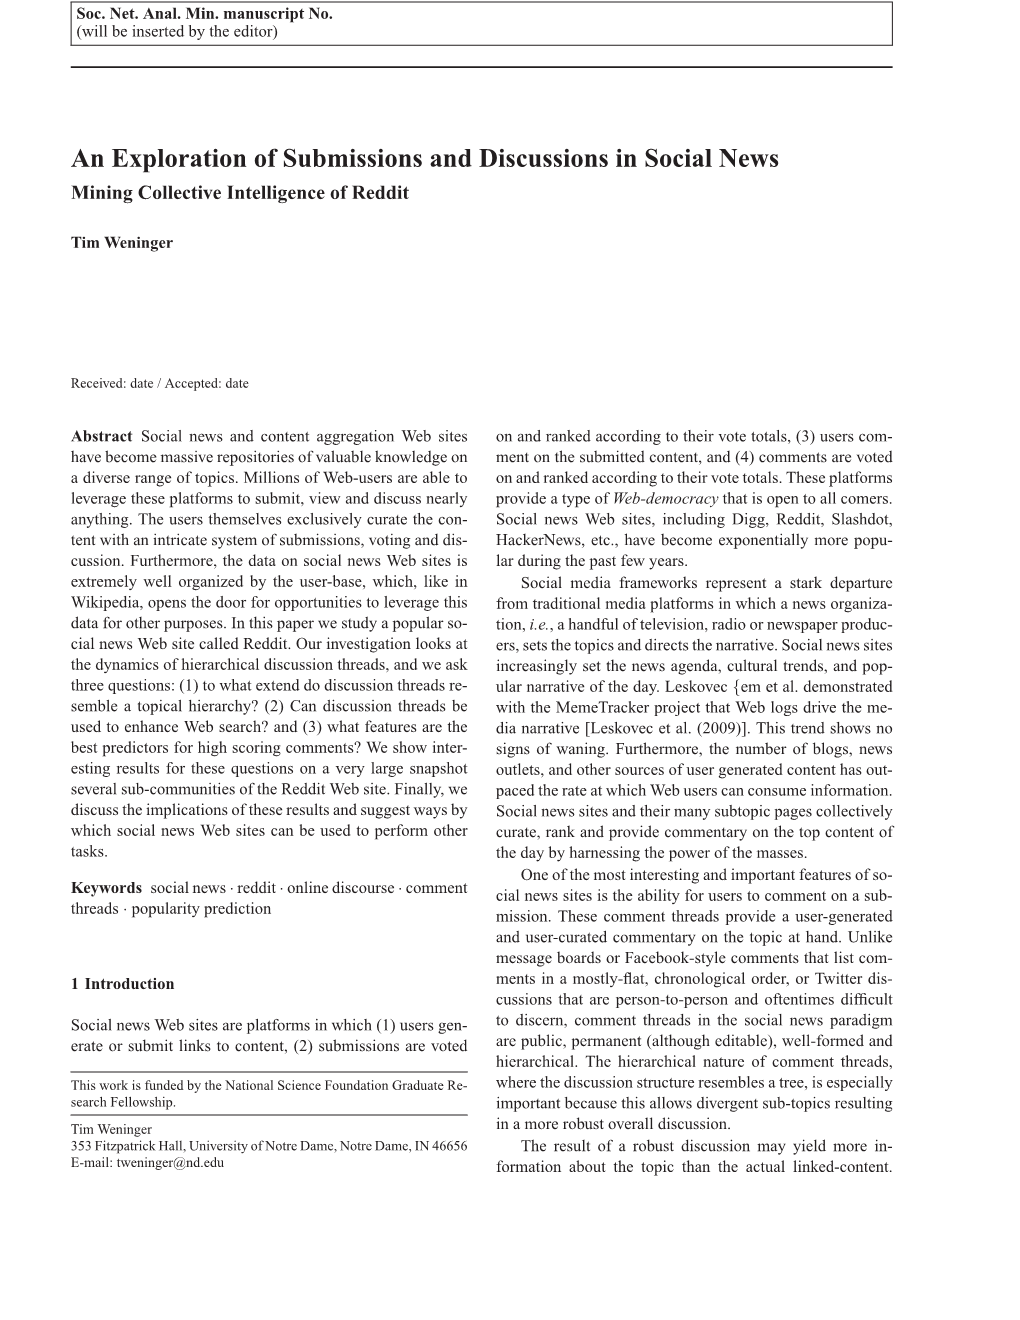 An Exploration of Submissions and Discussions in Social News Mining Collective Intelligence of Reddit